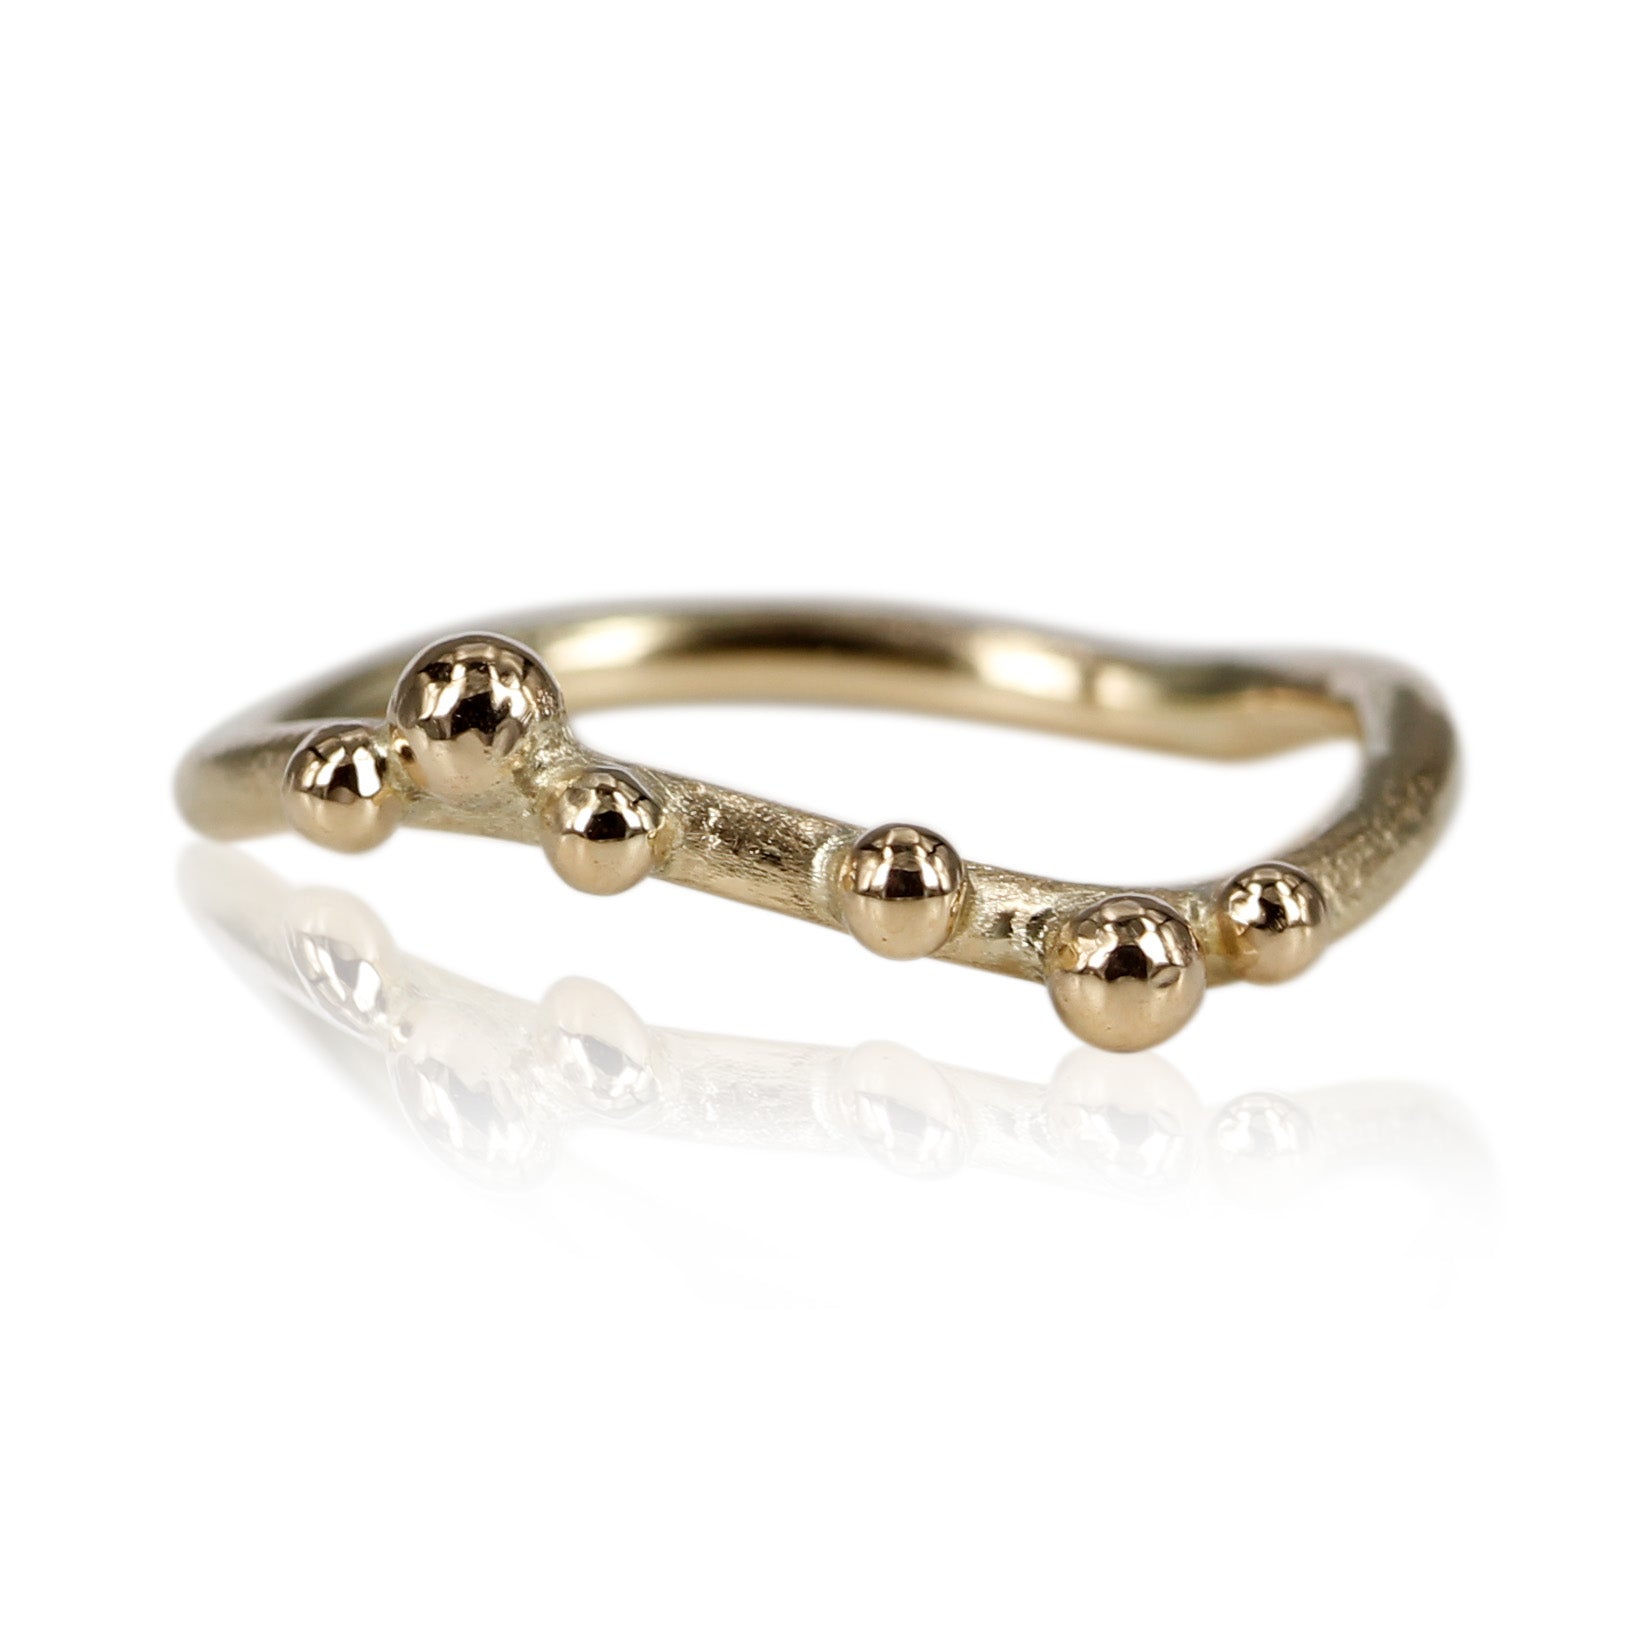 Bubbles - 14kt Guld ring